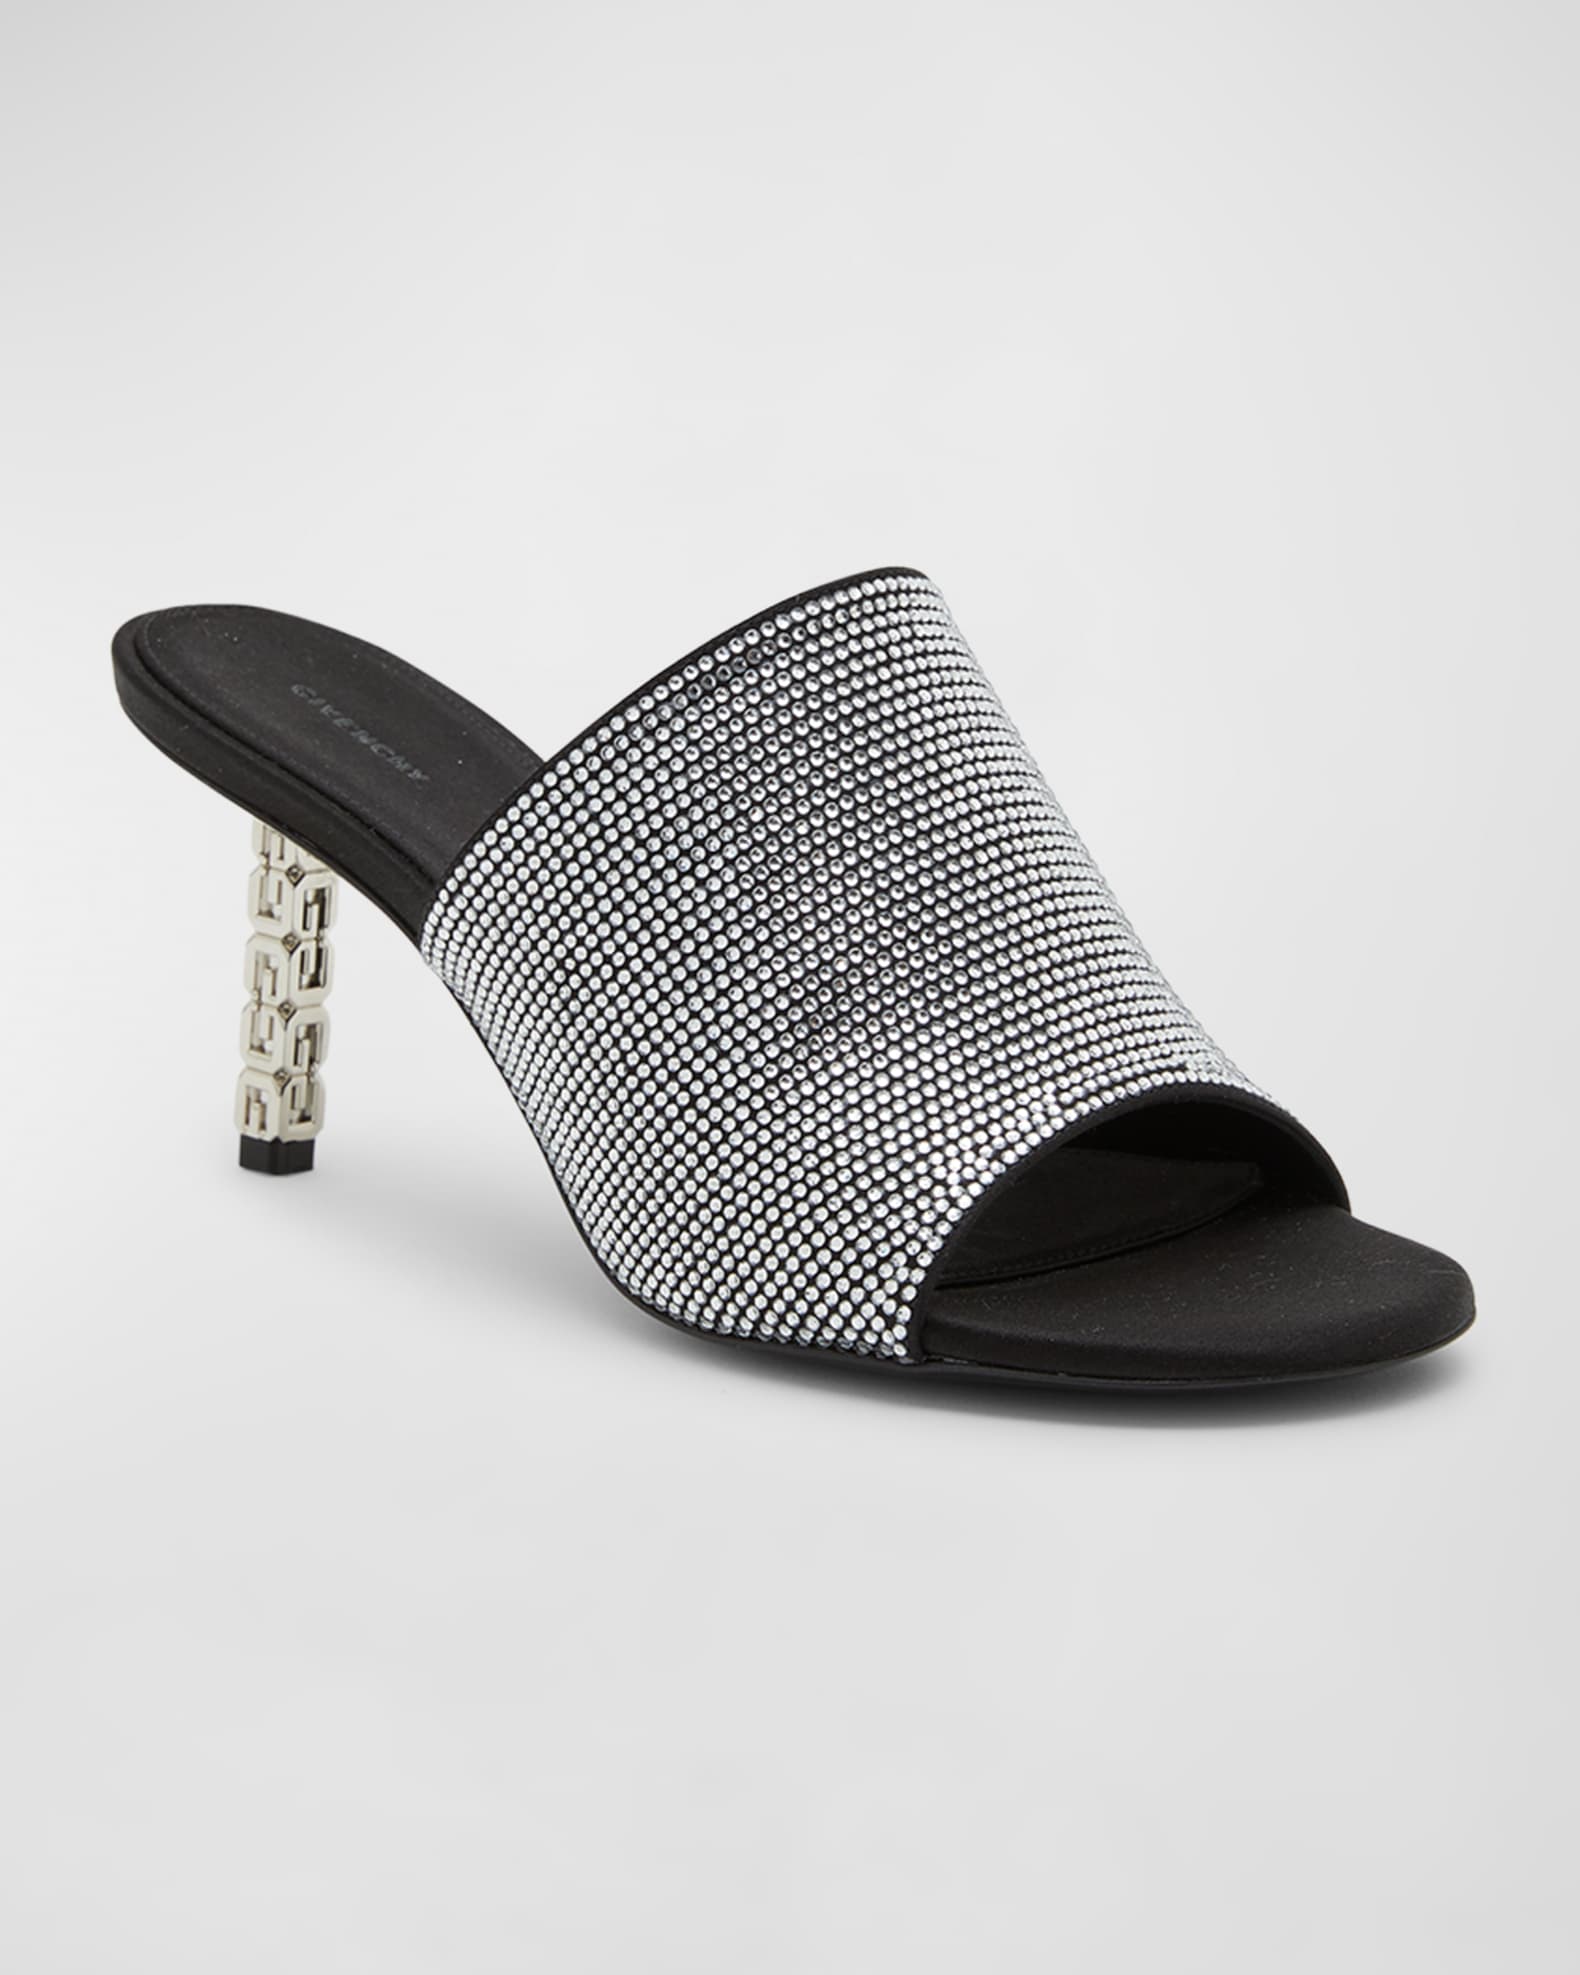 Givenchy Strass G Cube-Heel Slide Sandals | Neiman Marcus